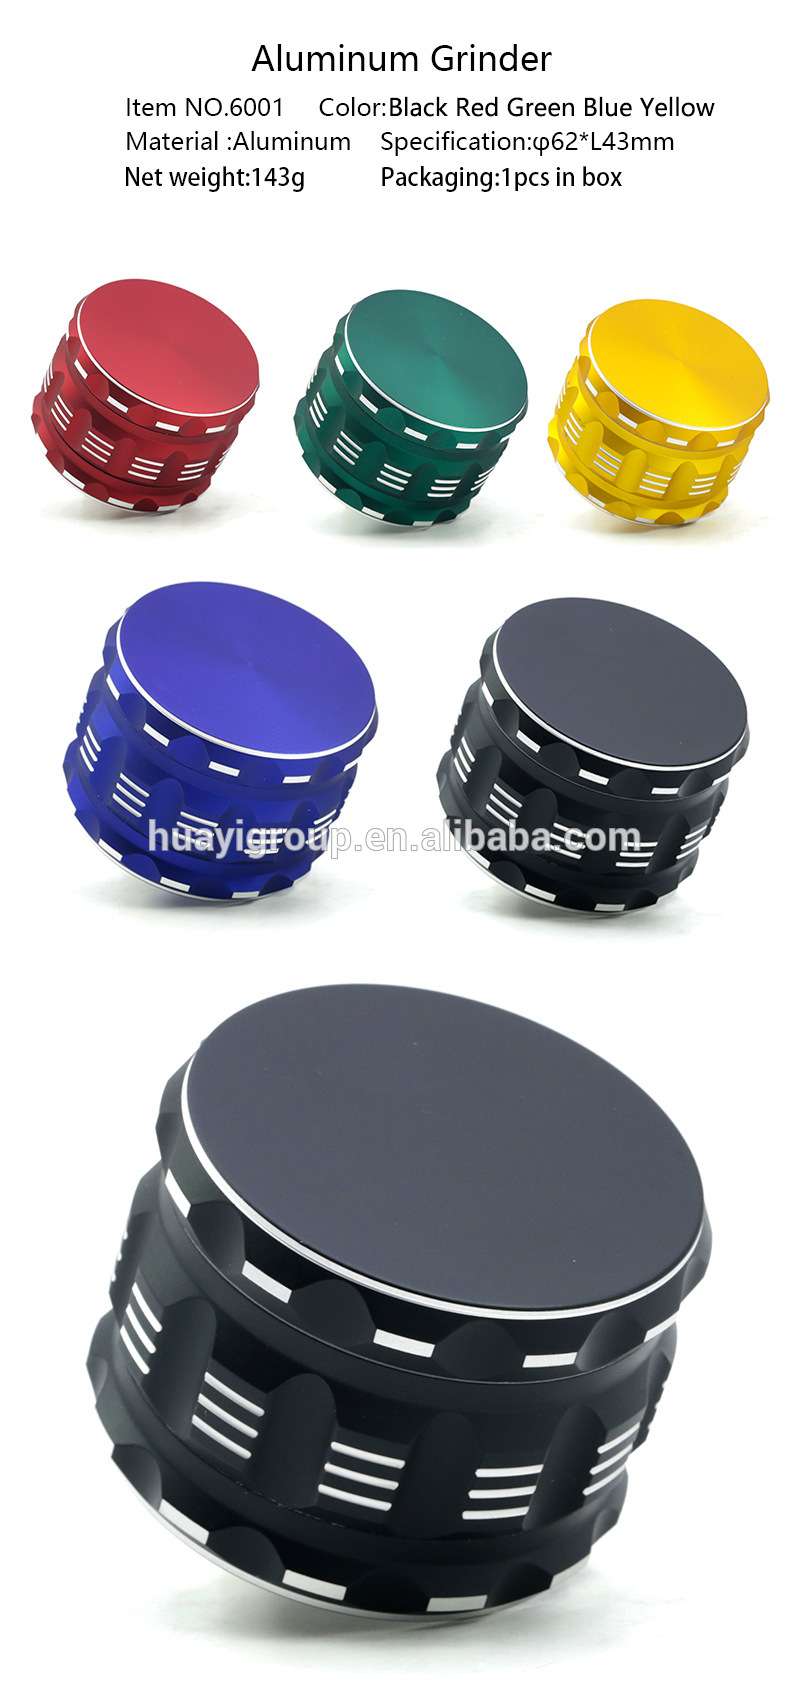 High quality custom logo silicone coating grinder 4 layer aluminum smoking weed accessories tobacco herb grinder